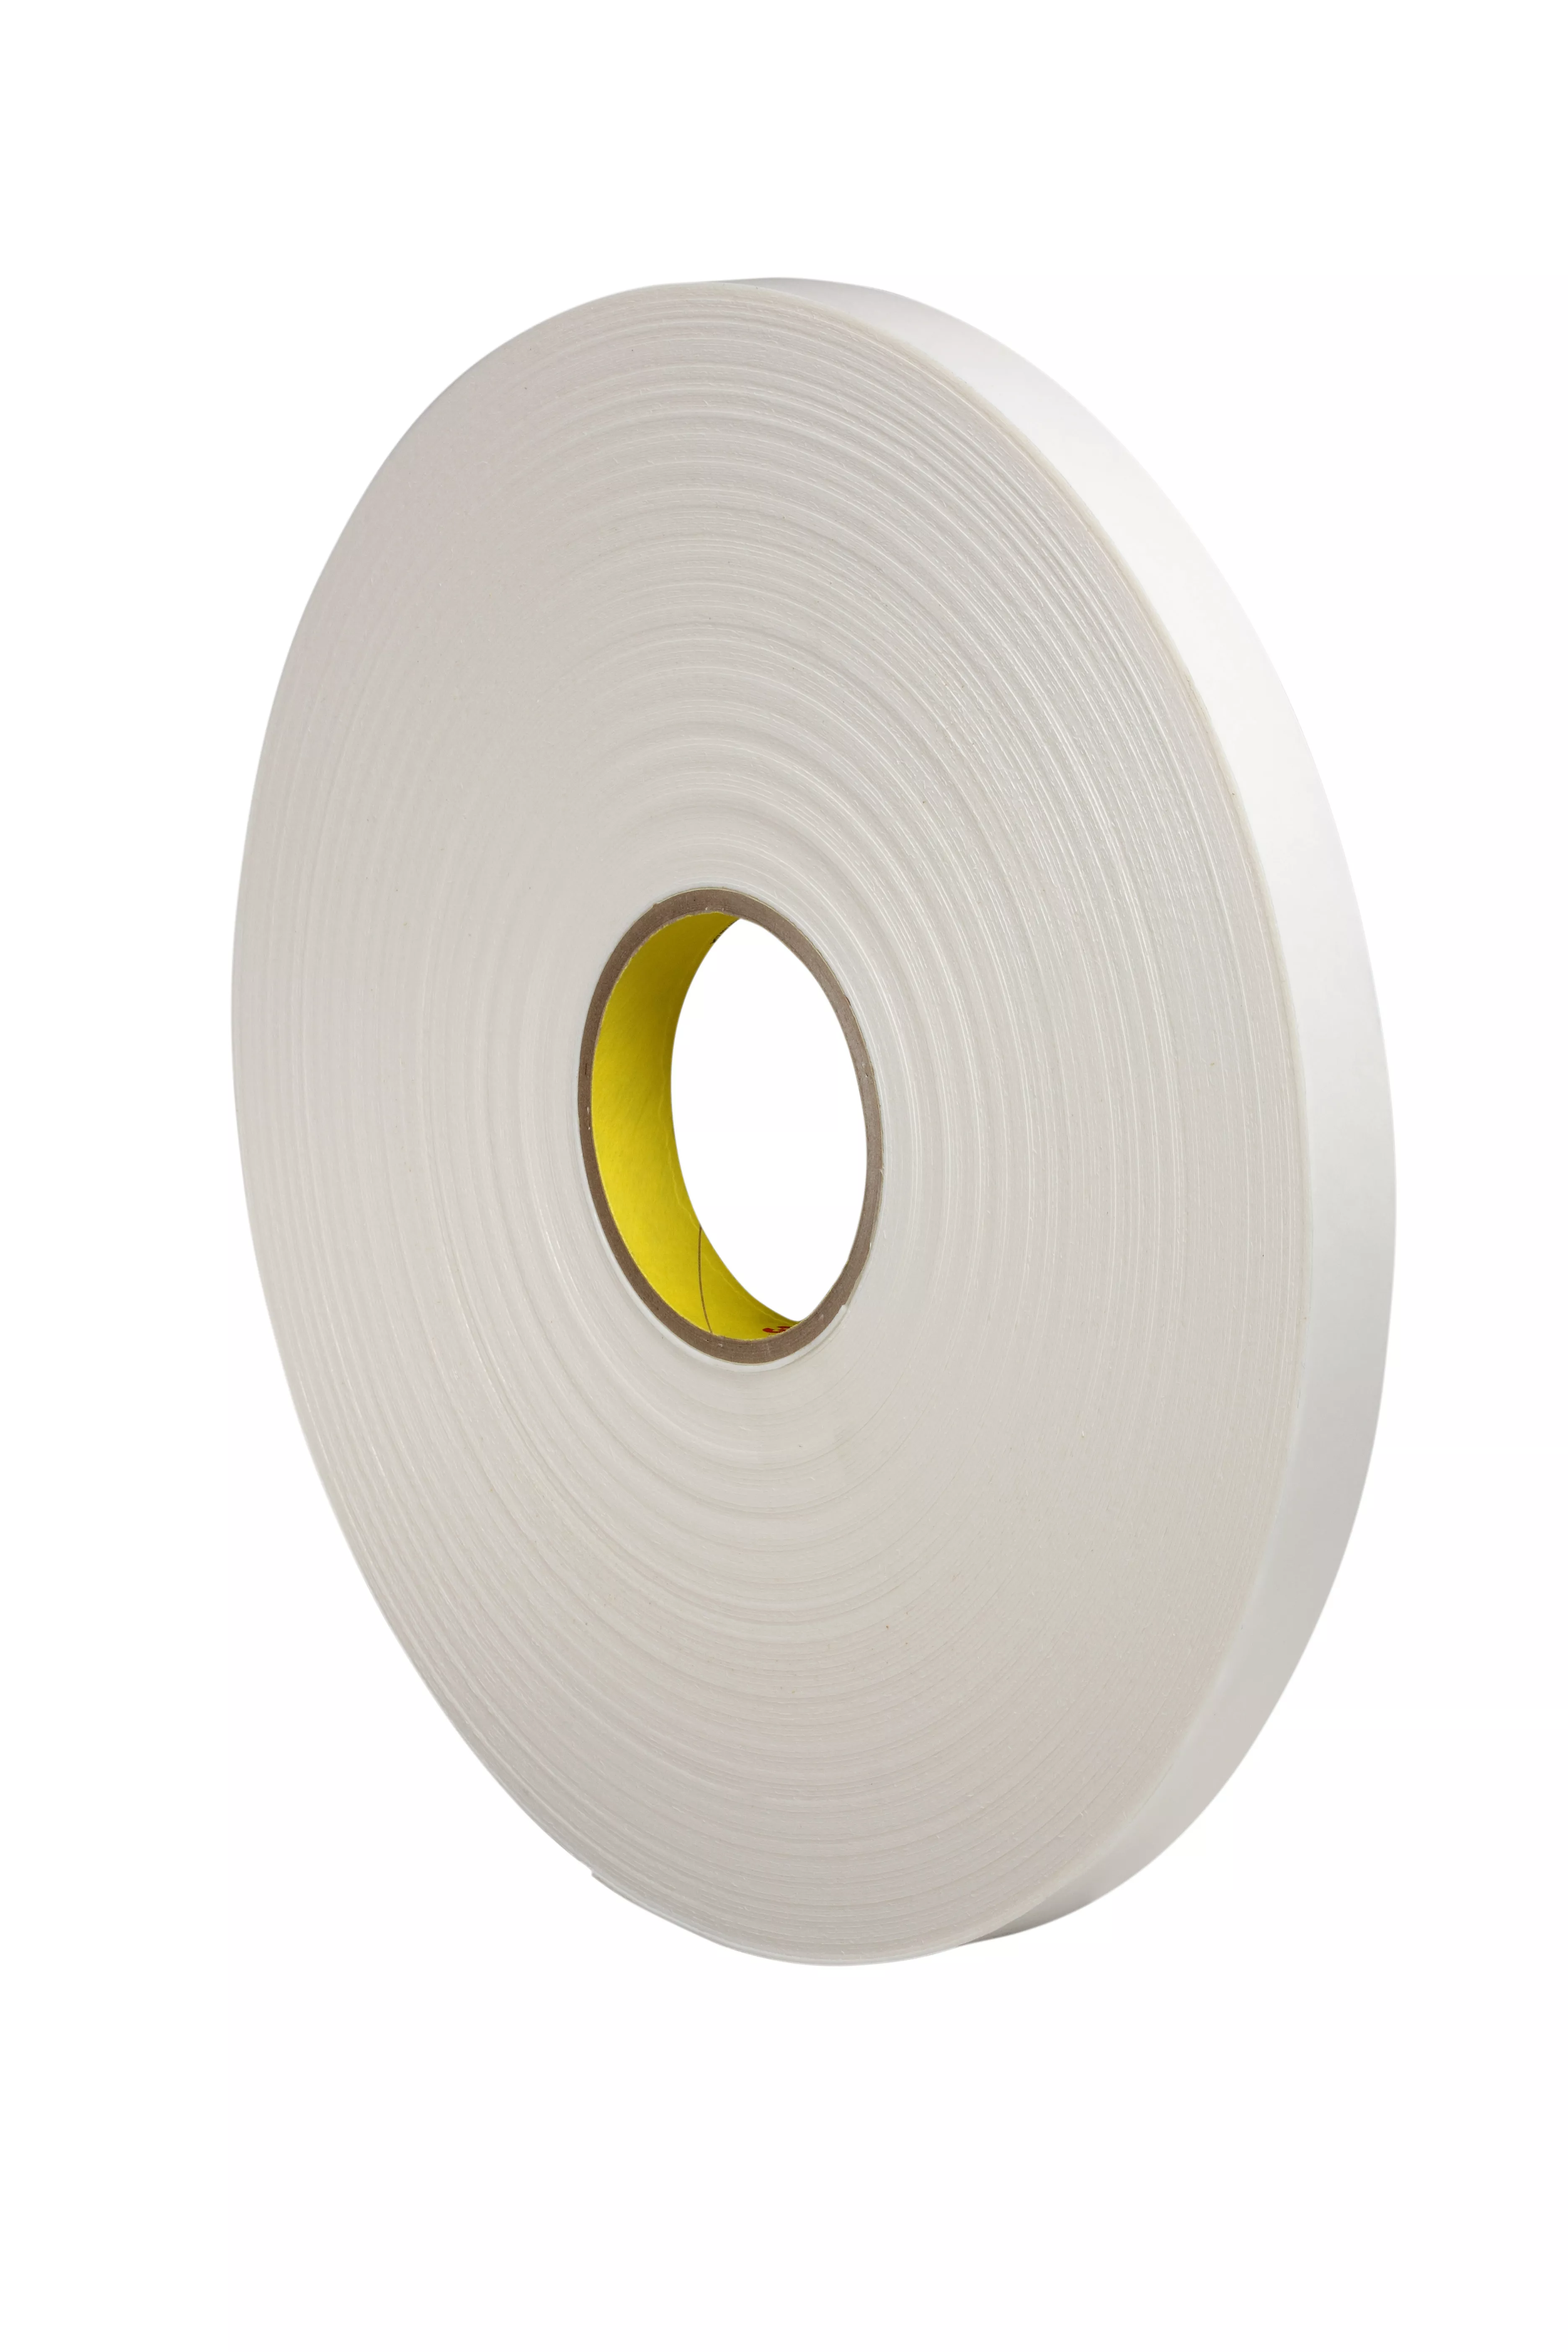 3M™ Urethane Foam Tape 4104, Natural, 3/4 in x 18 yd, 250 mil, 12
Roll/Case